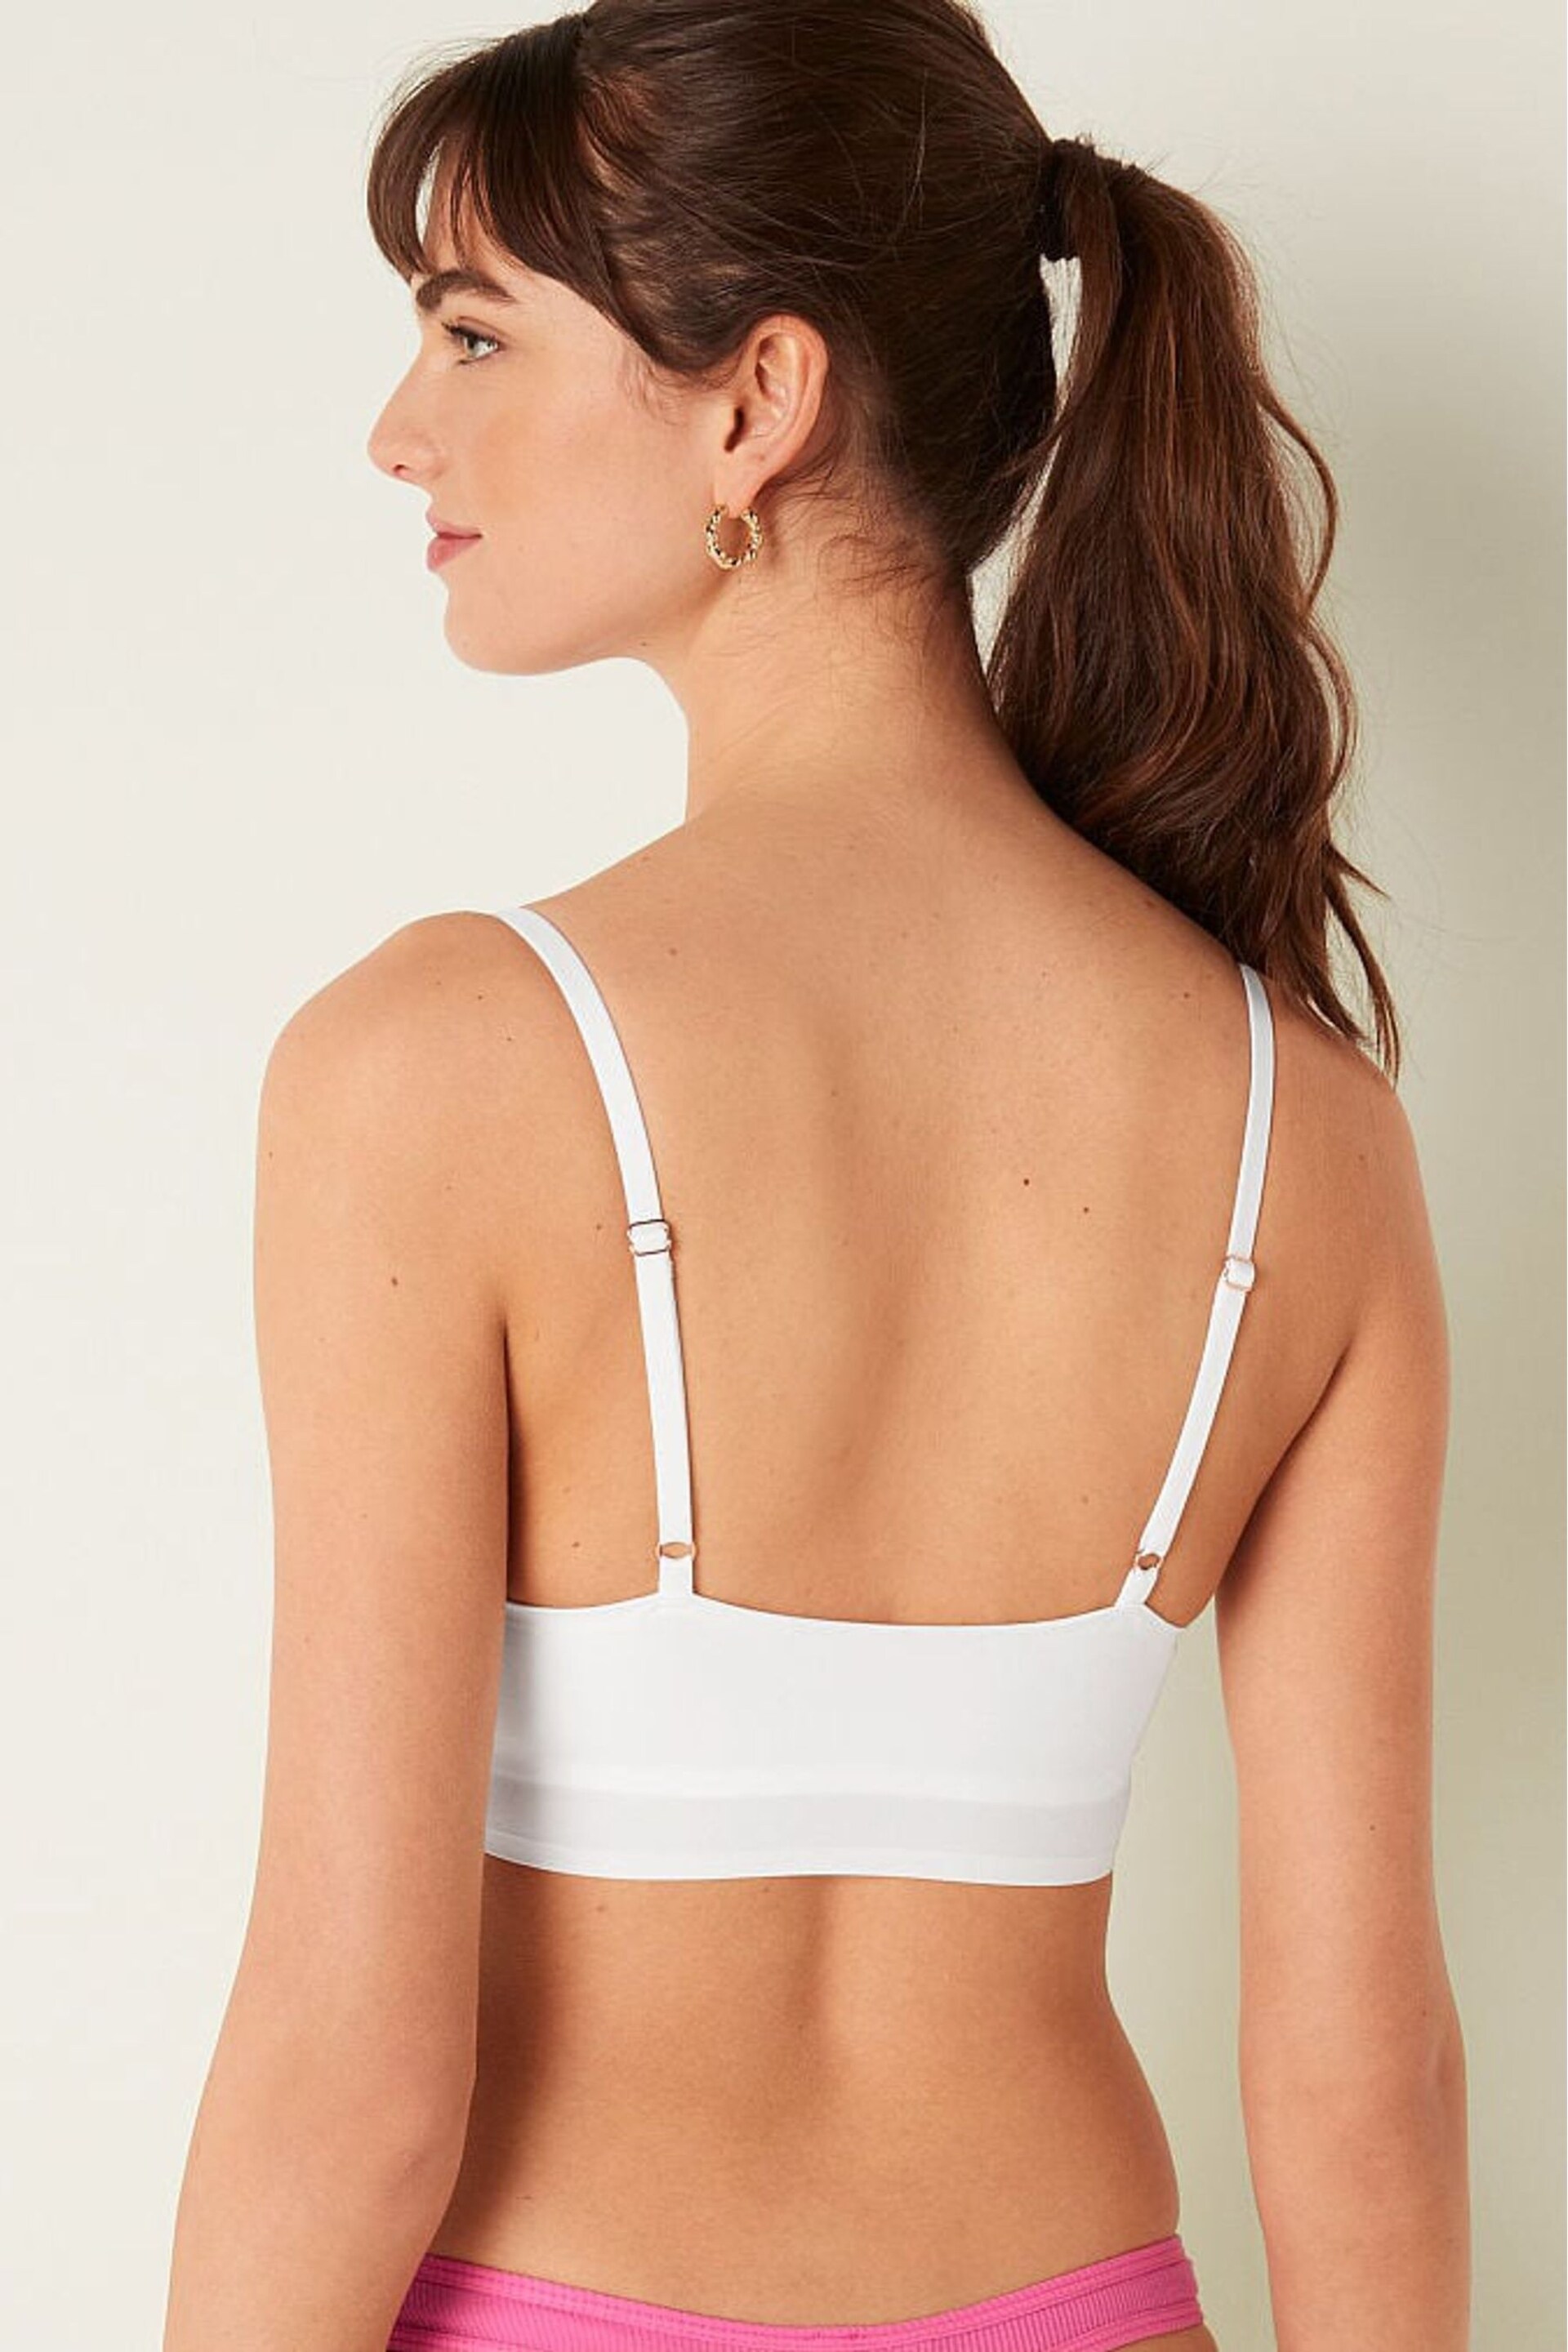 Victoria's Secret PINK Optic White Non Wired Push Up Lounge Bralette - Image 2 of 4